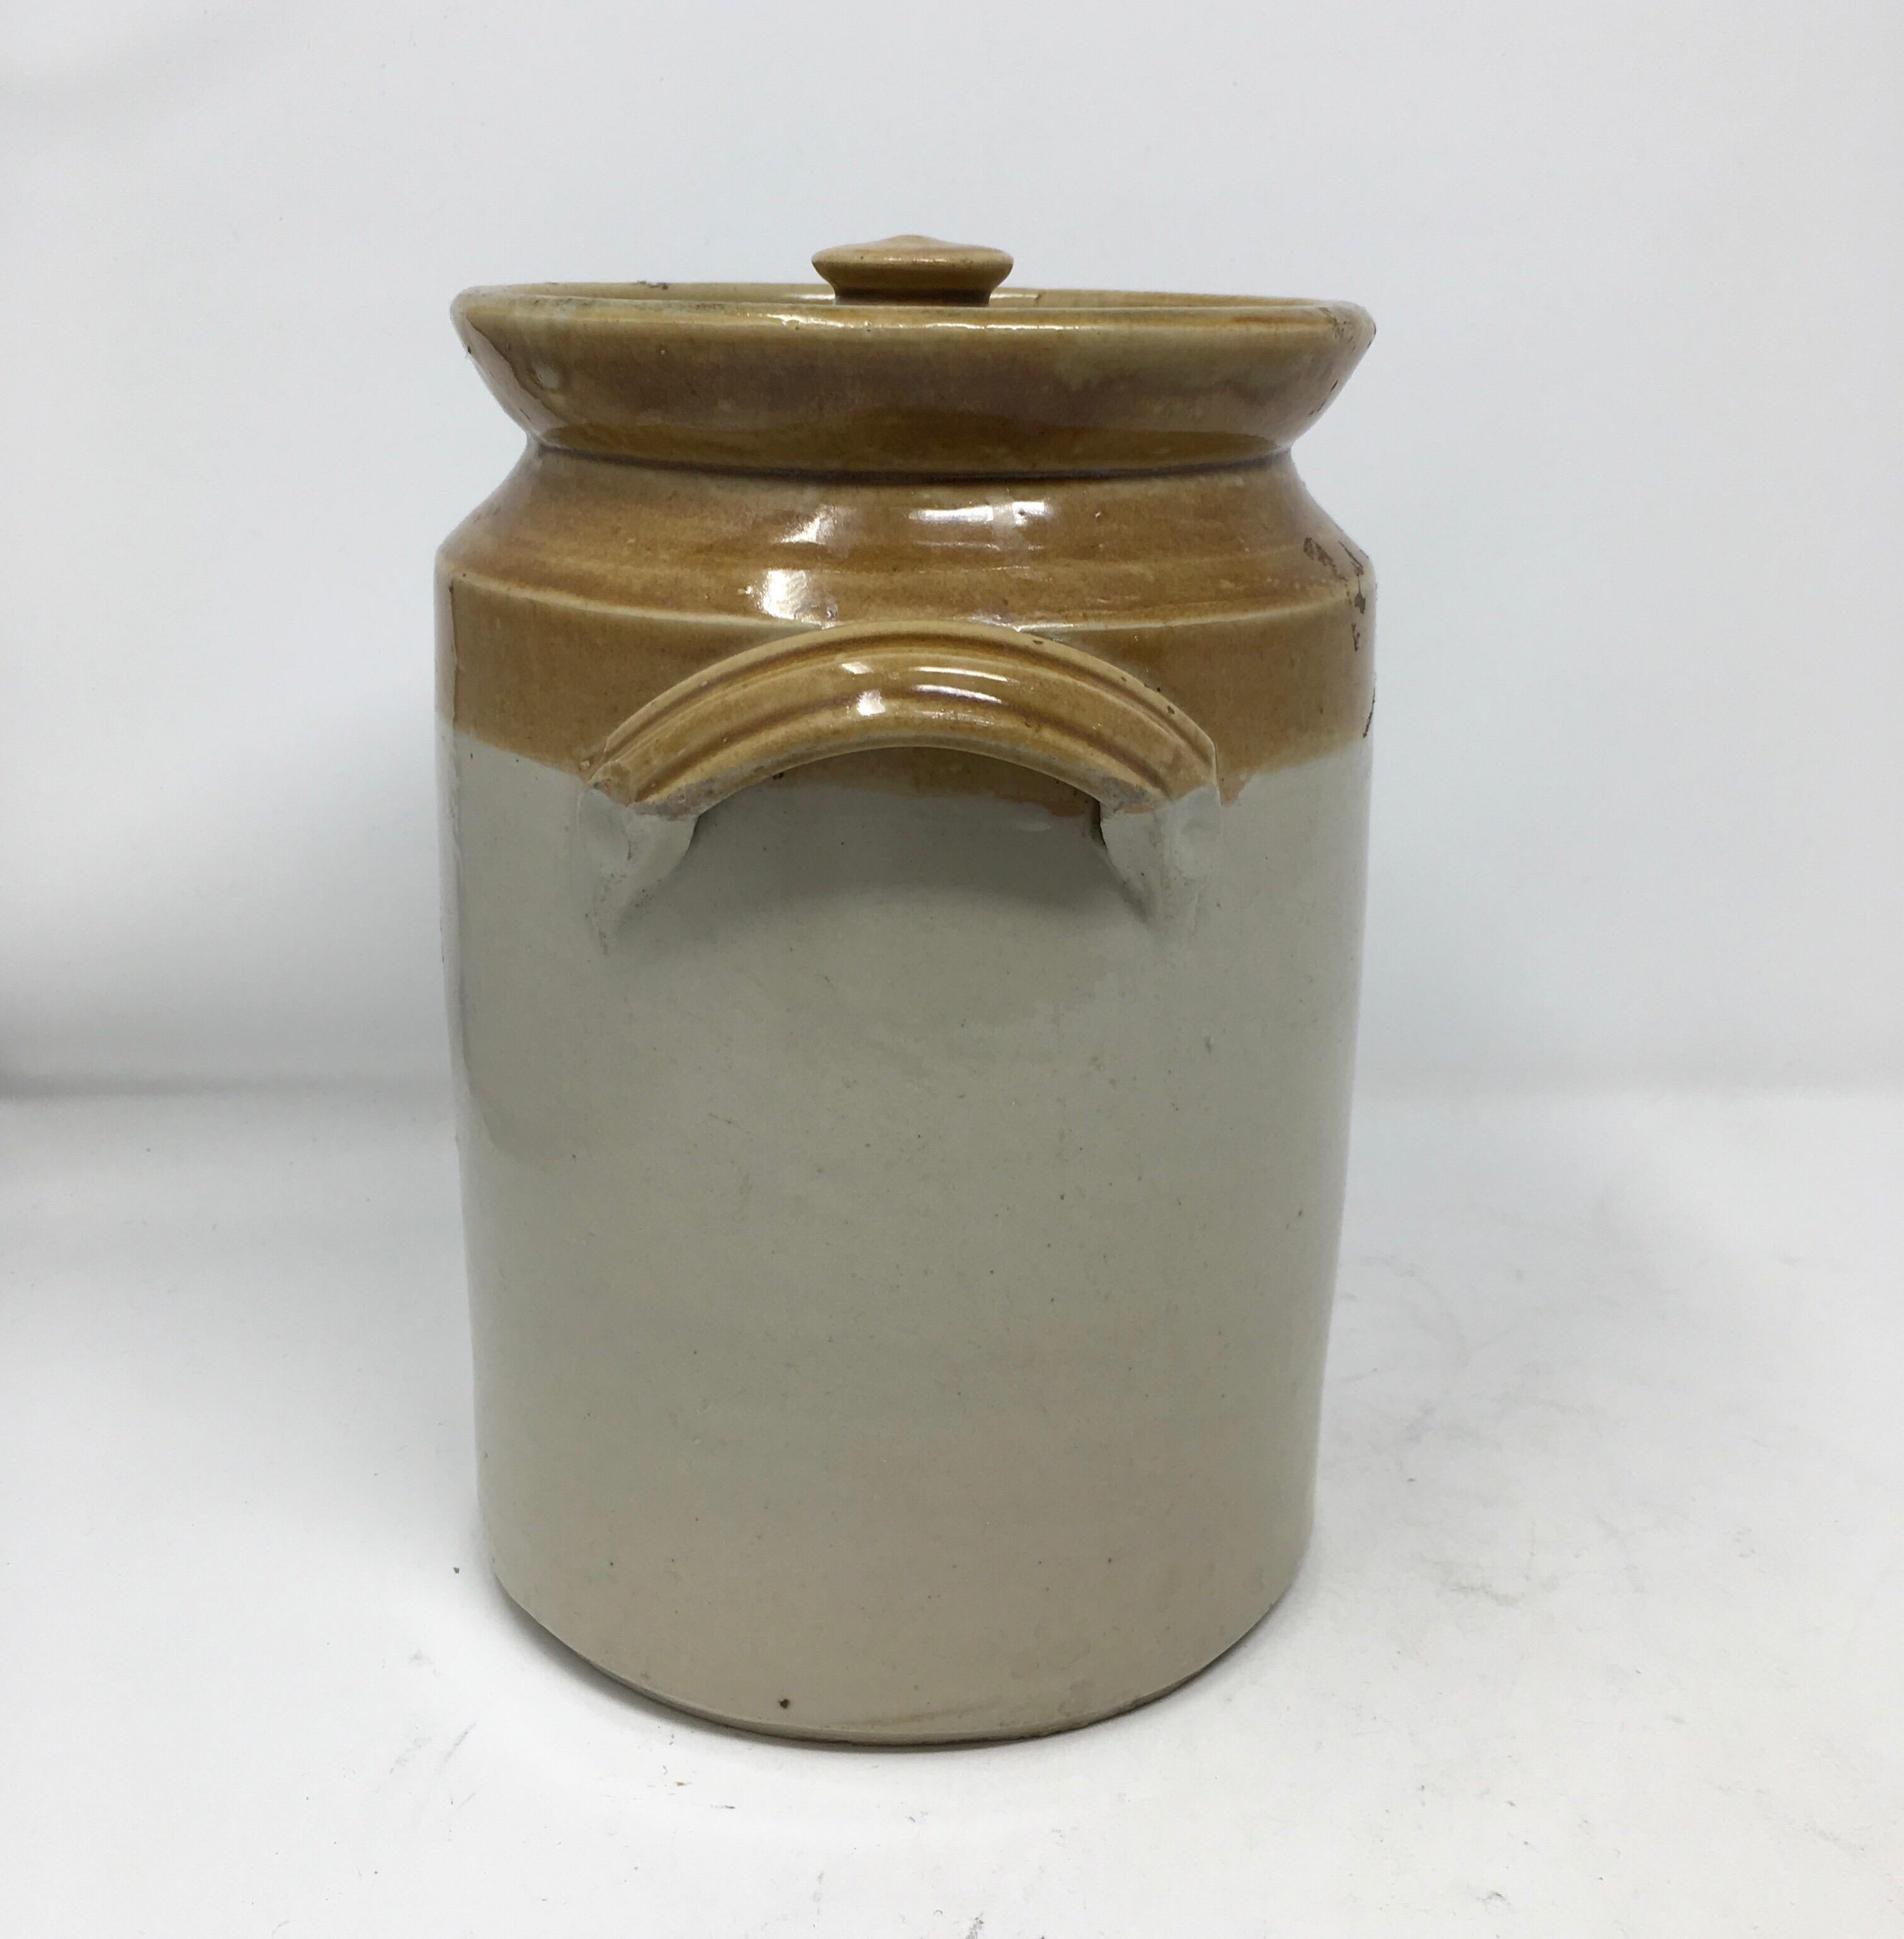 Imported from England, this 19th century sugar crock comes complete with its original lid. This two handled crock has a light cream color glaze on the bottom with a golden color on the top with 